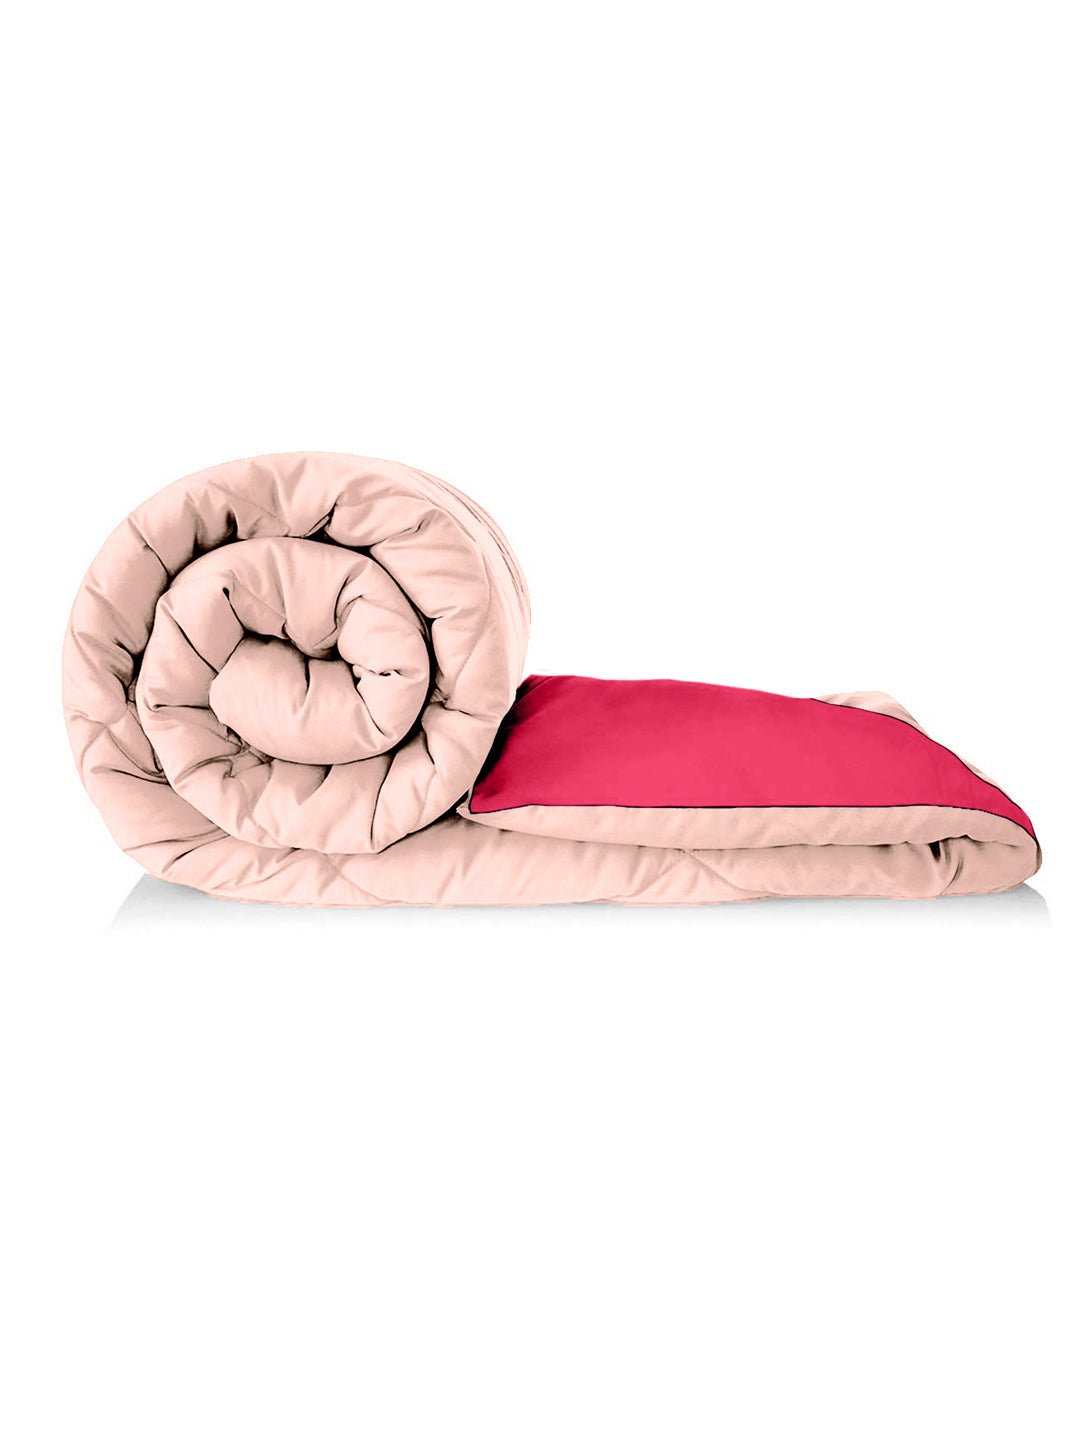 Reversible Single Bed Comforter 200 GSM 60x90 Inches (Pink & Peach)